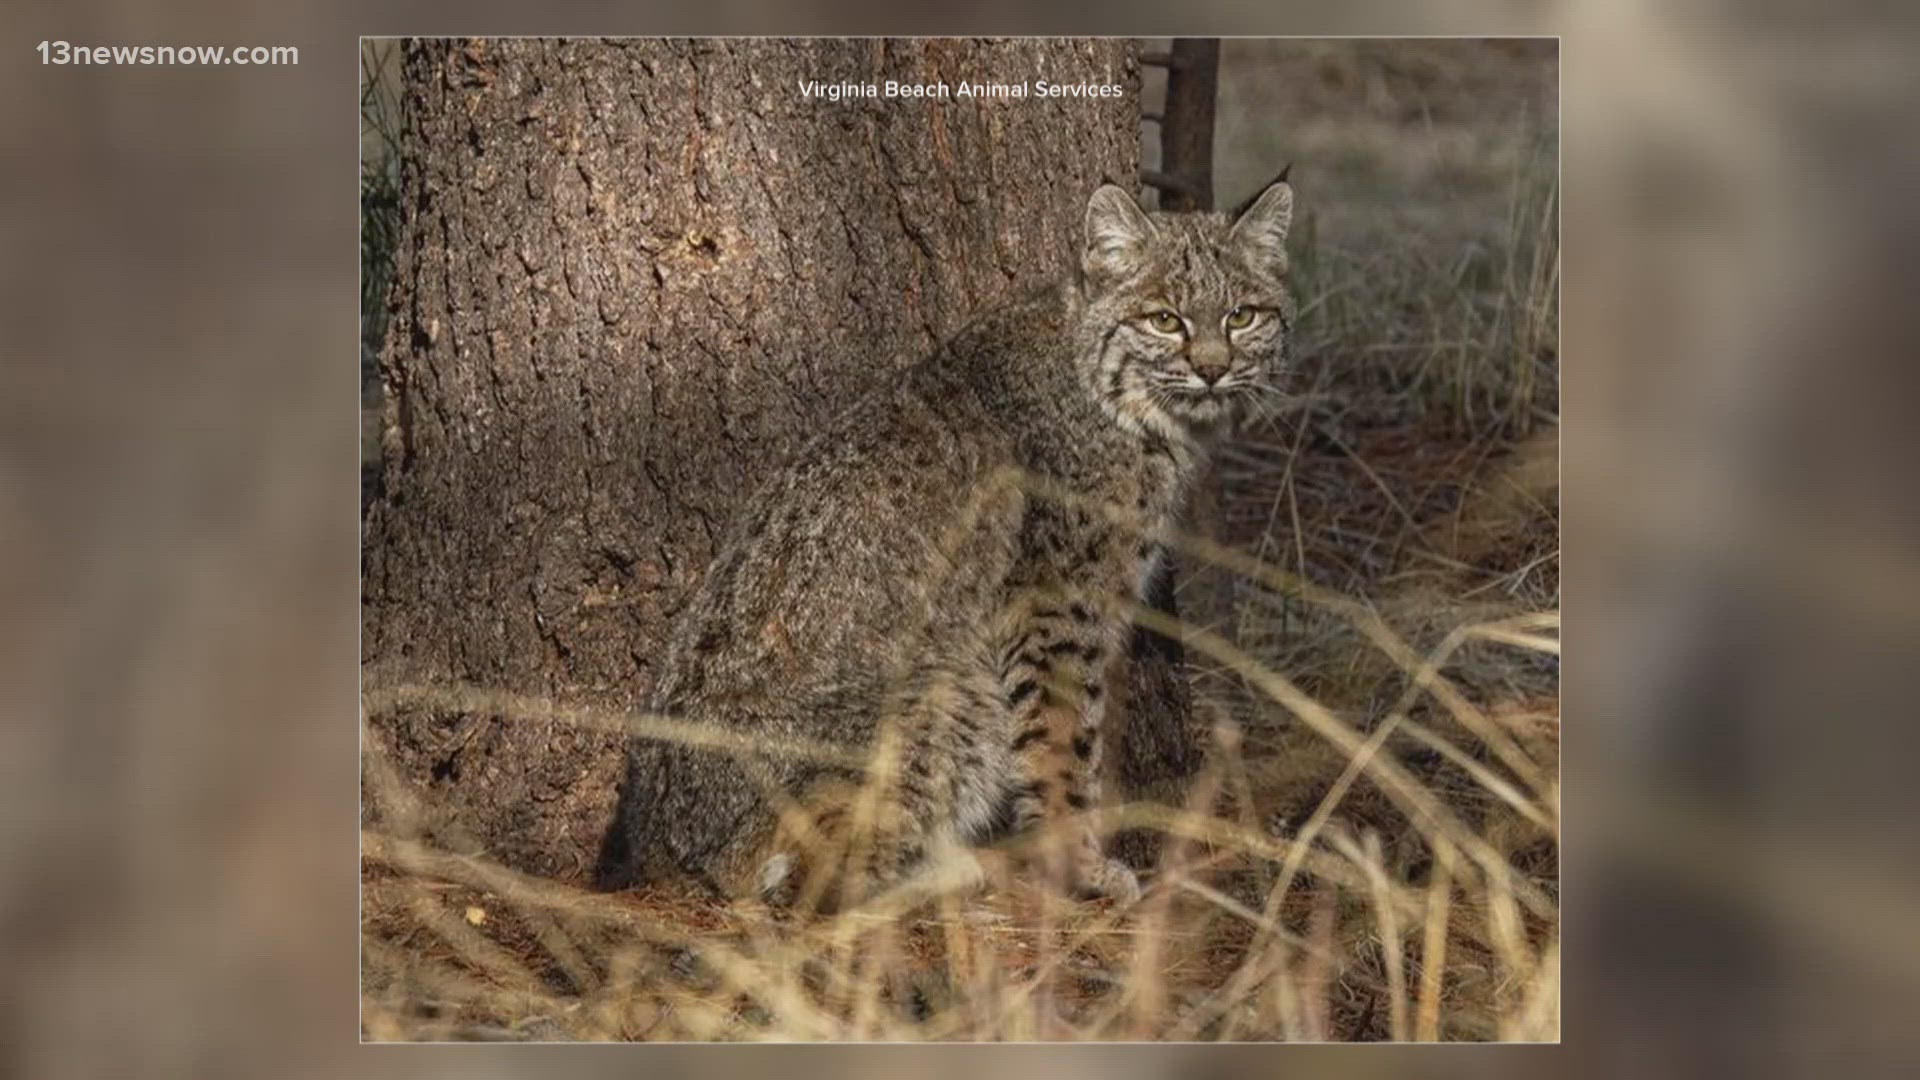 Animal services say a wild bobcat captured in an area off Princess Anne Road has tested positive for rabies.